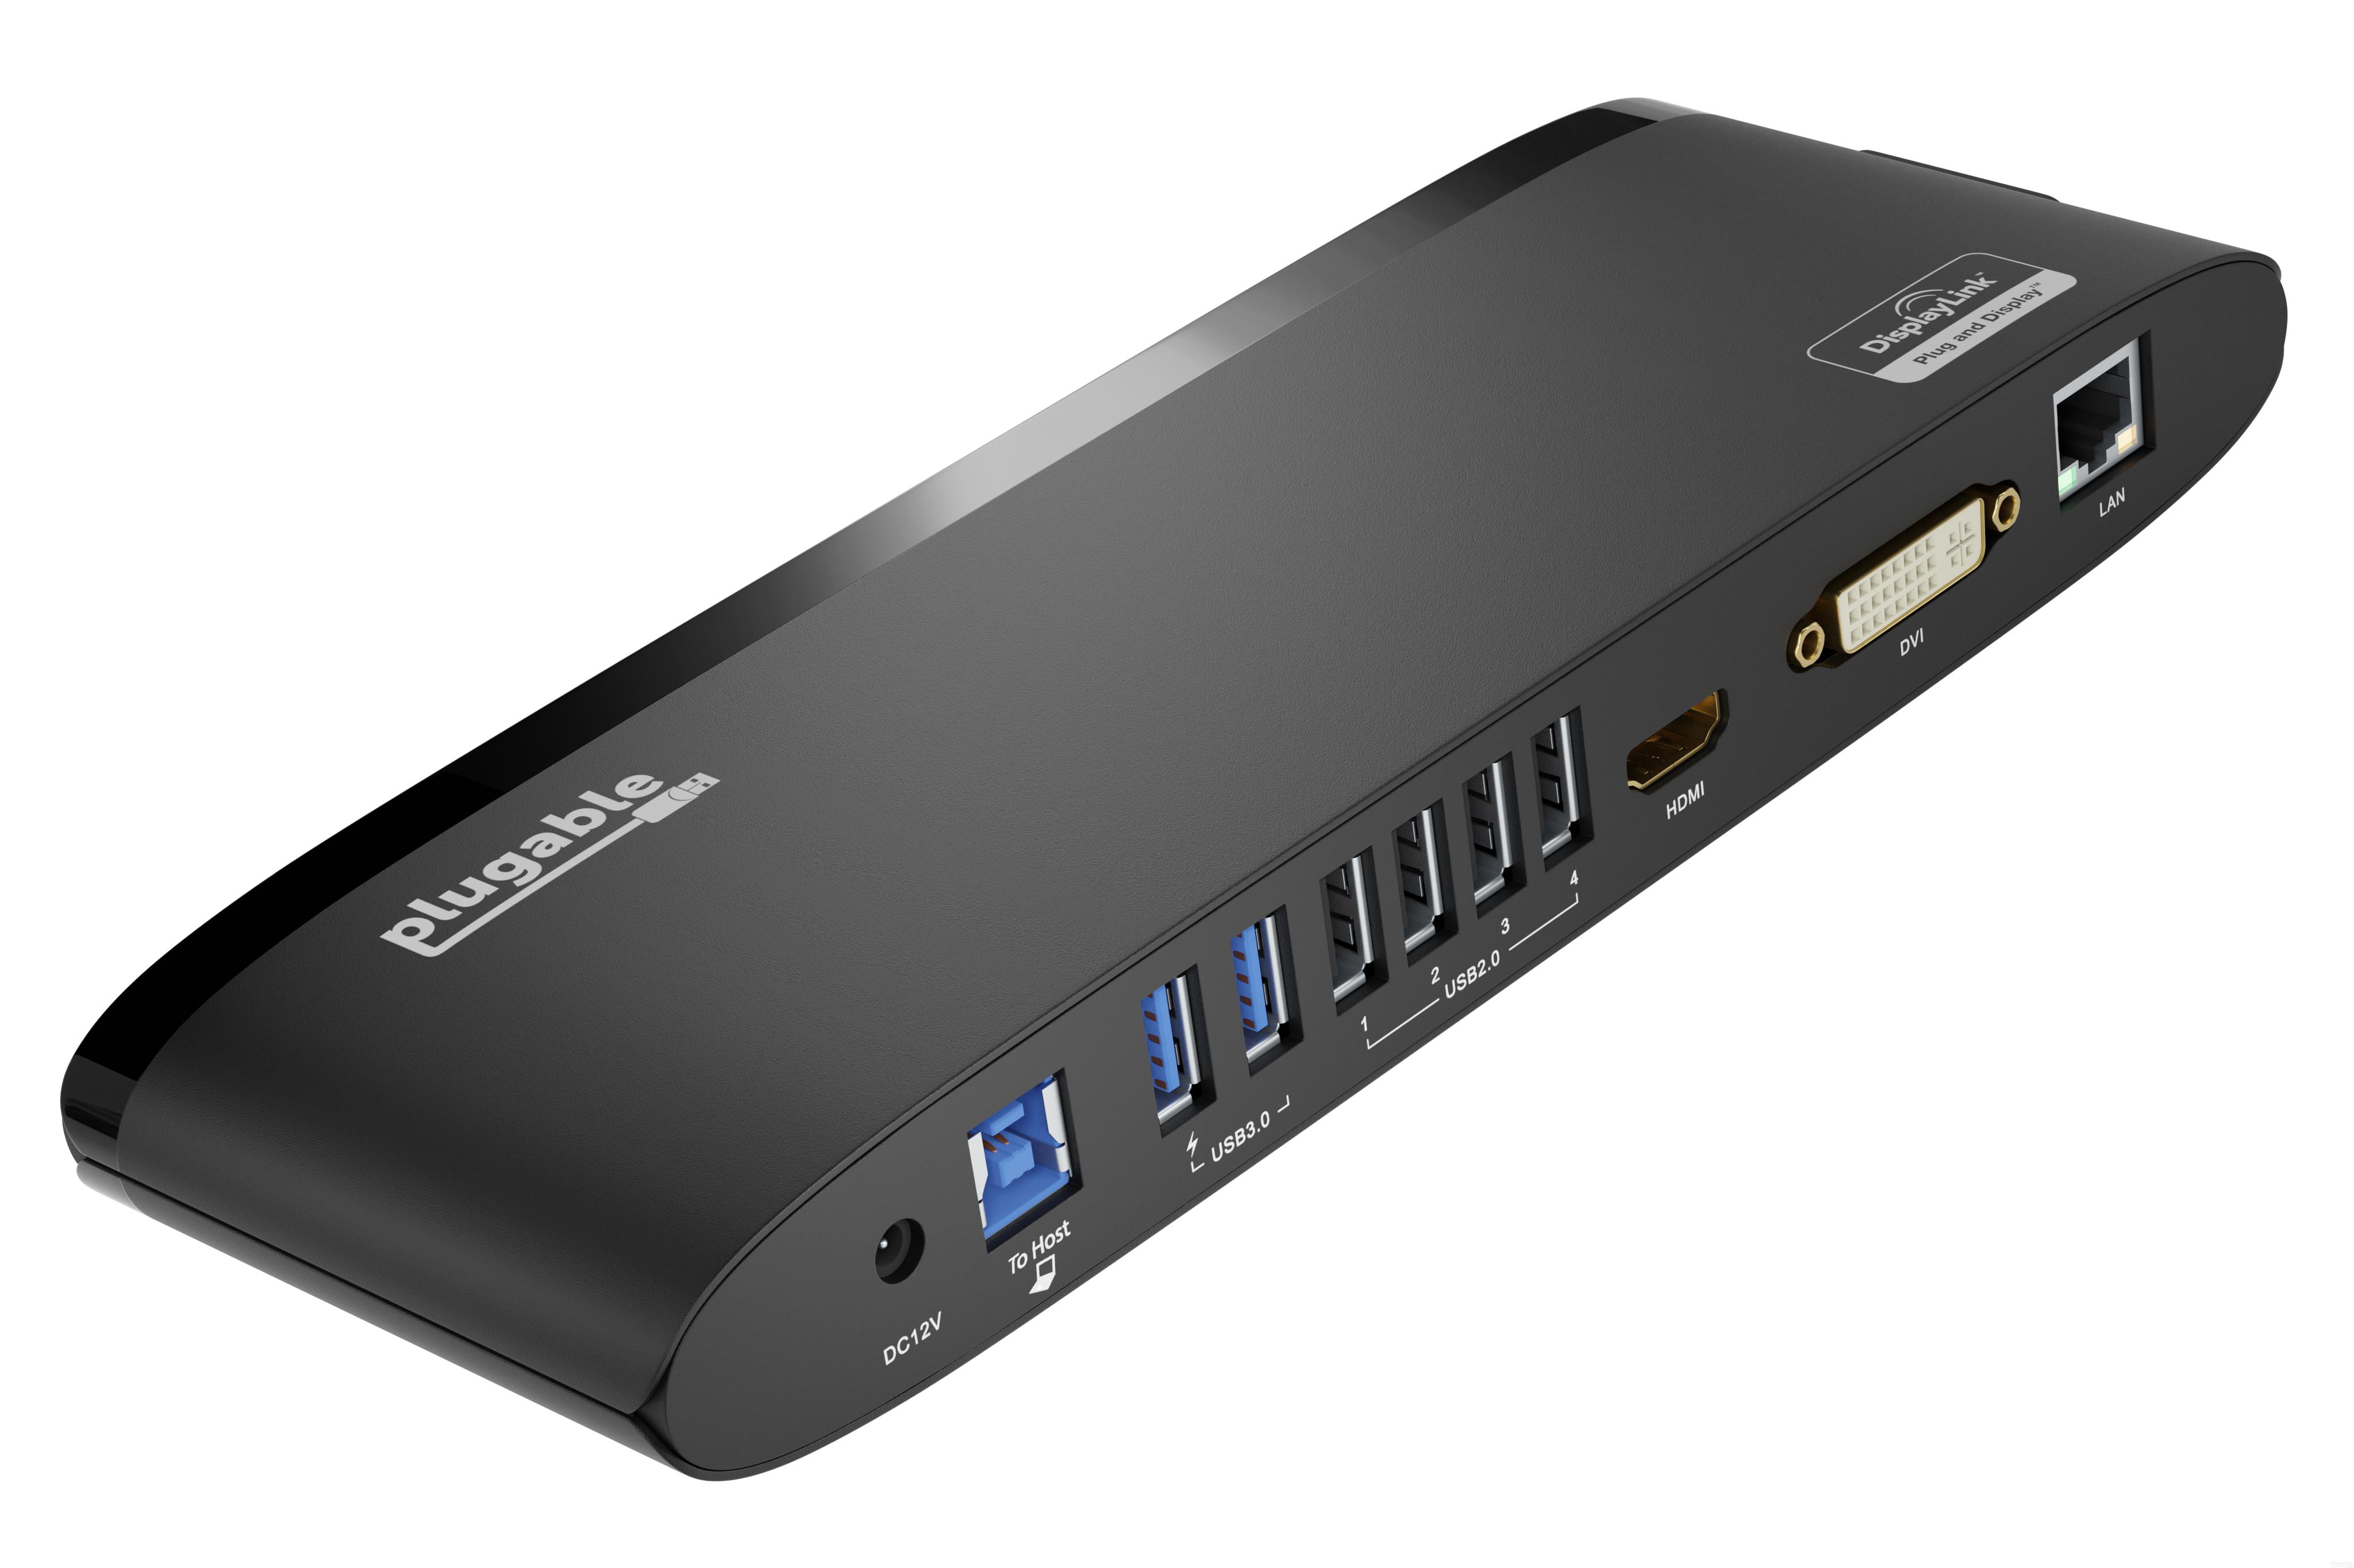 A black坞站 with multiple ports, including USB, HDMI, and Ethernet, for connecting a laptop to external displays and peripherals.